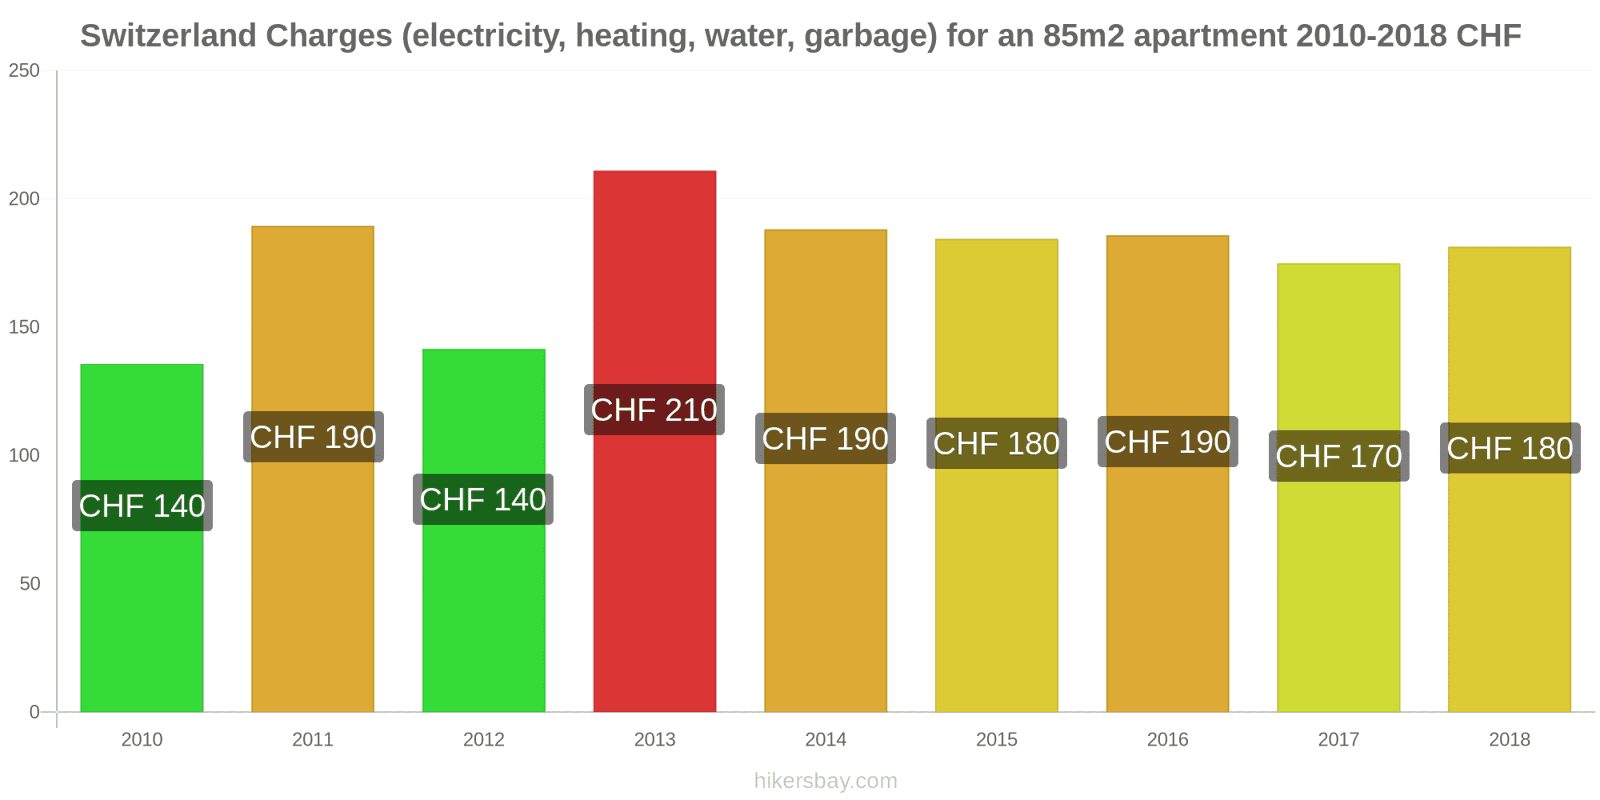 Switzerland price changes Utilities (electricity, heating, water, garbage) for an 85m2 apartment hikersbay.com